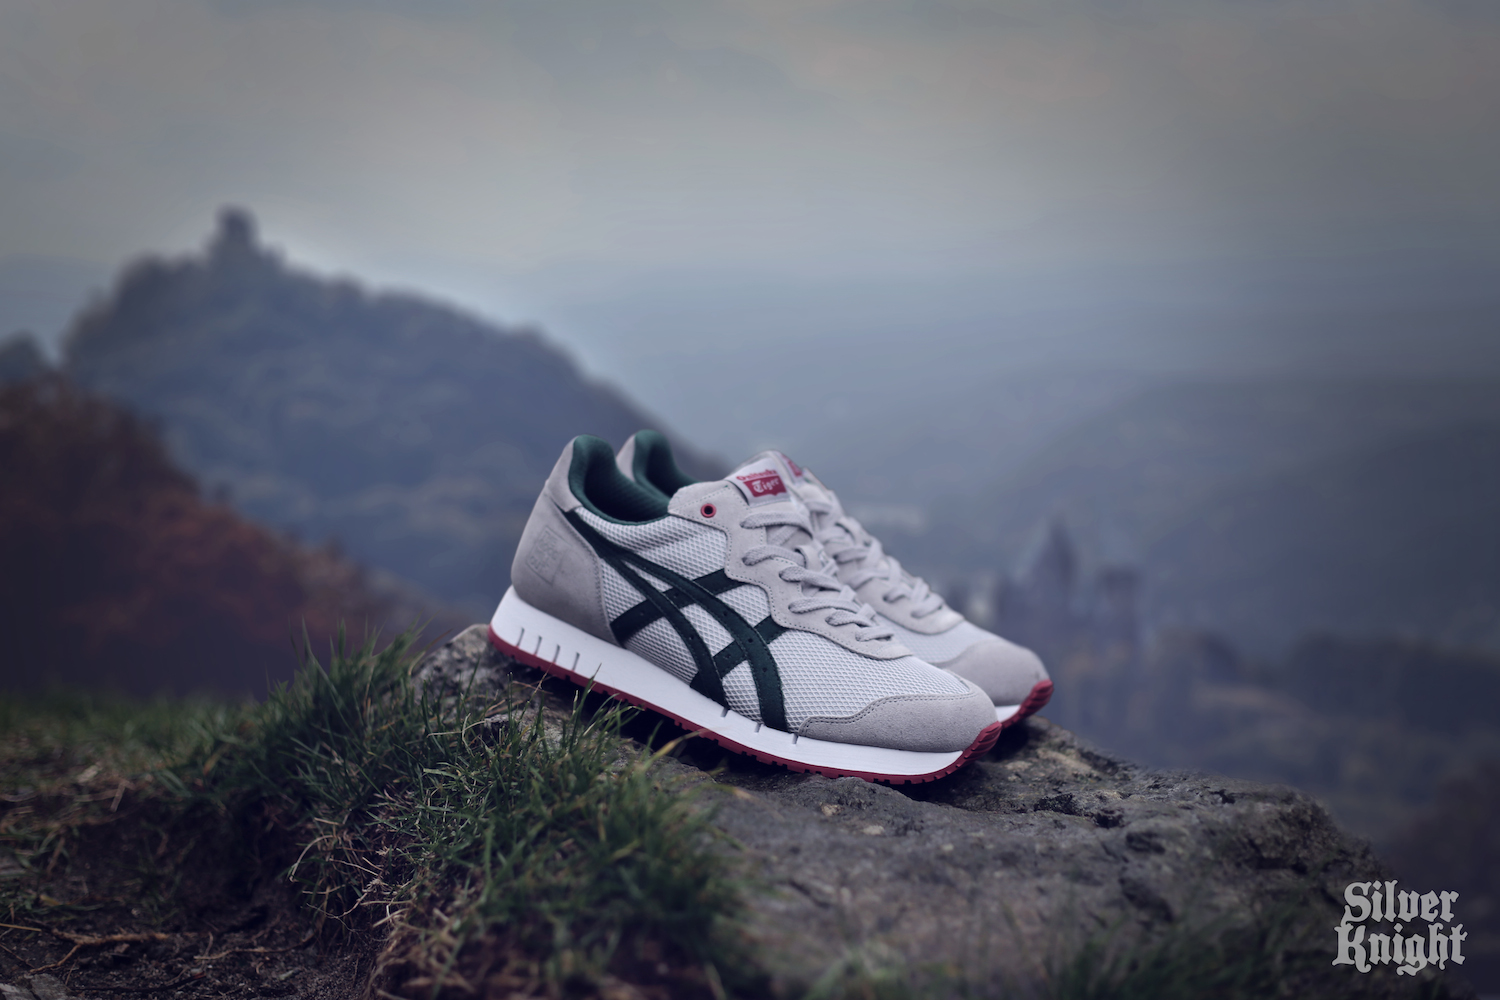 The Good Will Out x Onitsuka Tiger X-Caliber Silver Knight